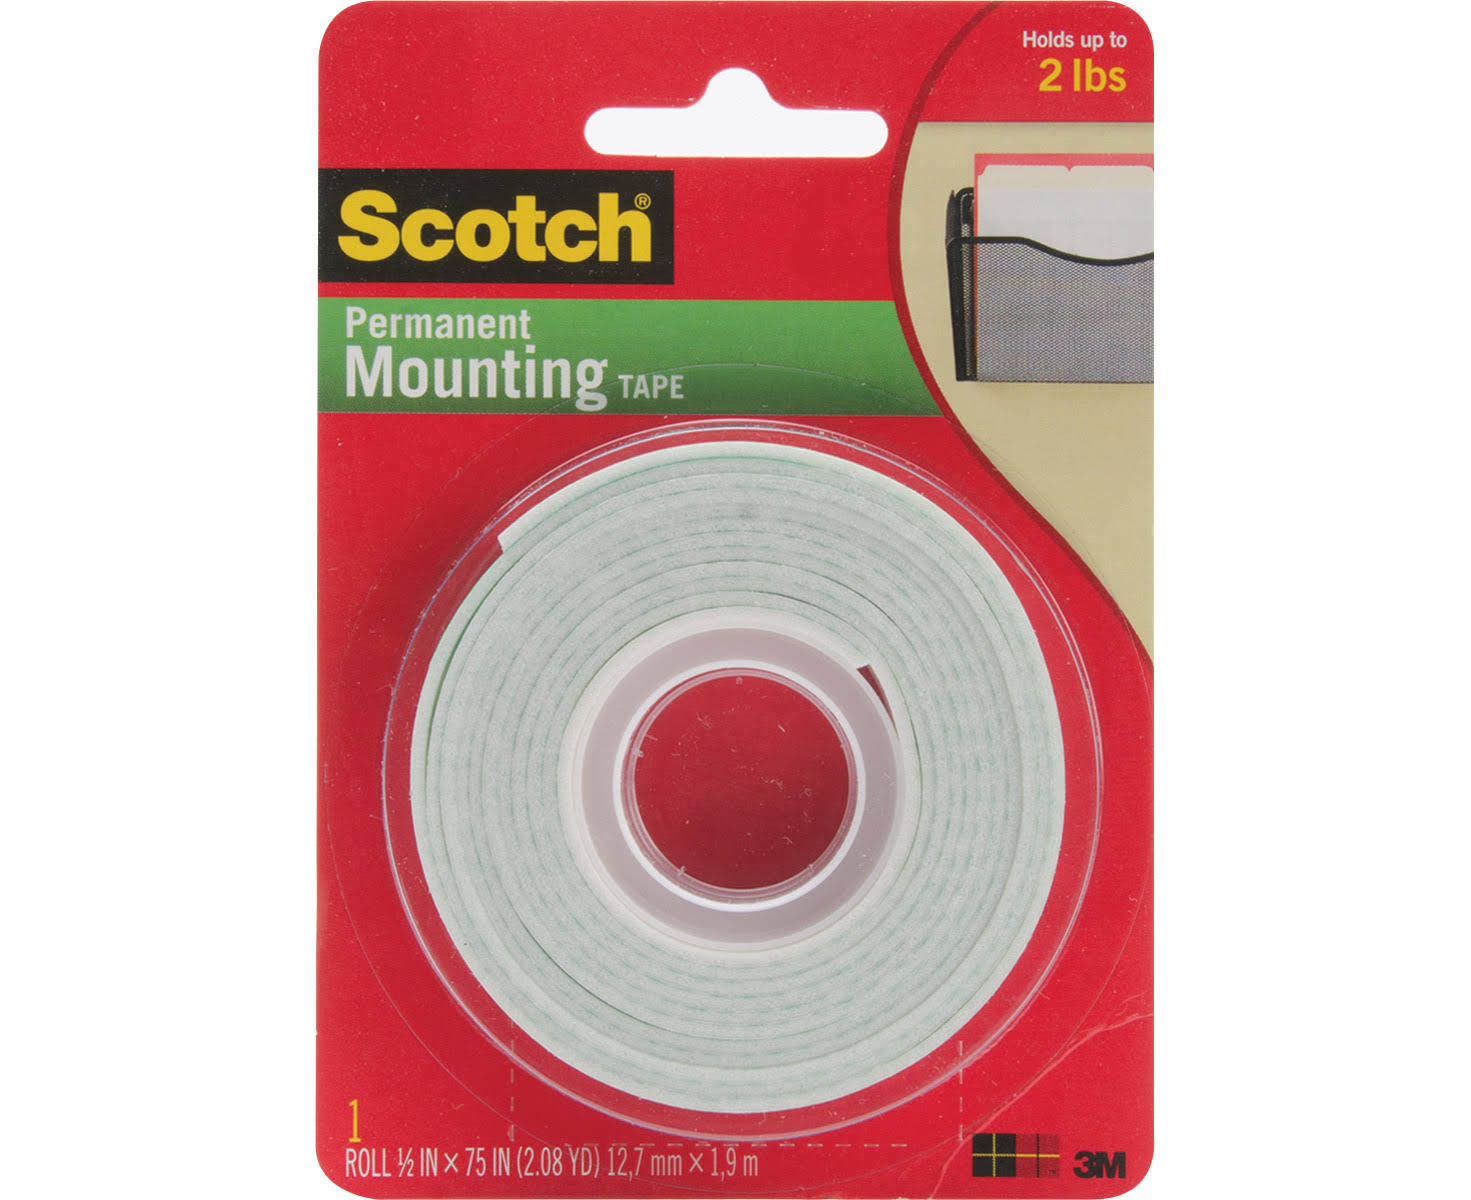 Scotch Mounting Tape - 5in x 75in